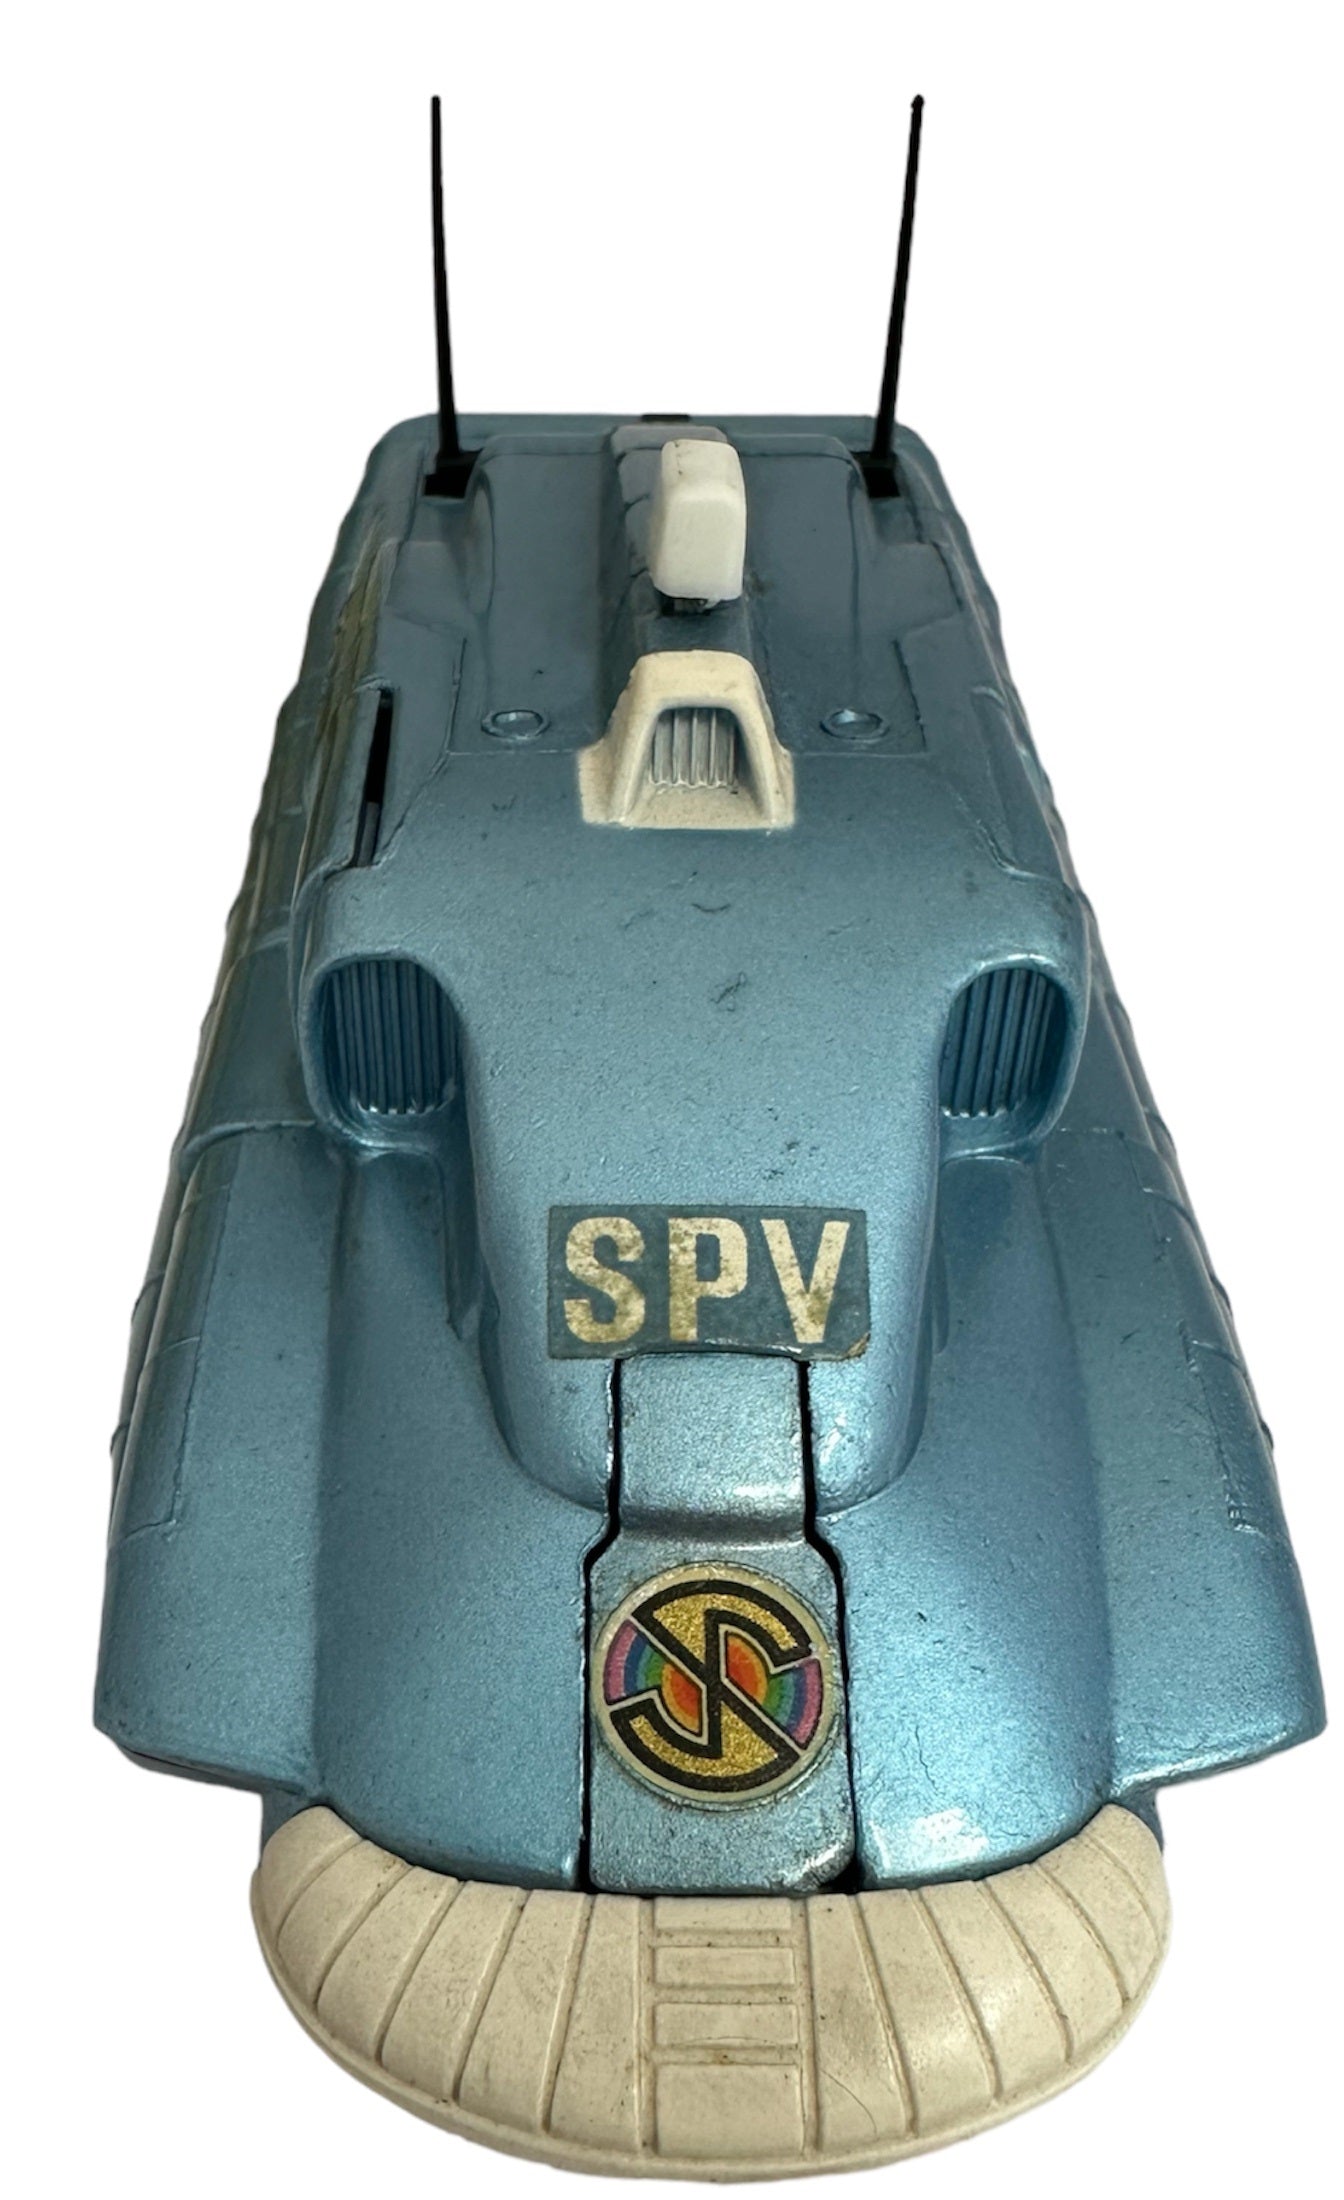 Vintage Dinky Toys 1970 Gerry Andersons Captain Scarlet And The Mysterons SPV Spectrum Pursuit Vehicle Diecast Model No. 104 - Fantastic Condition In The Original Box With Original Display Plinth